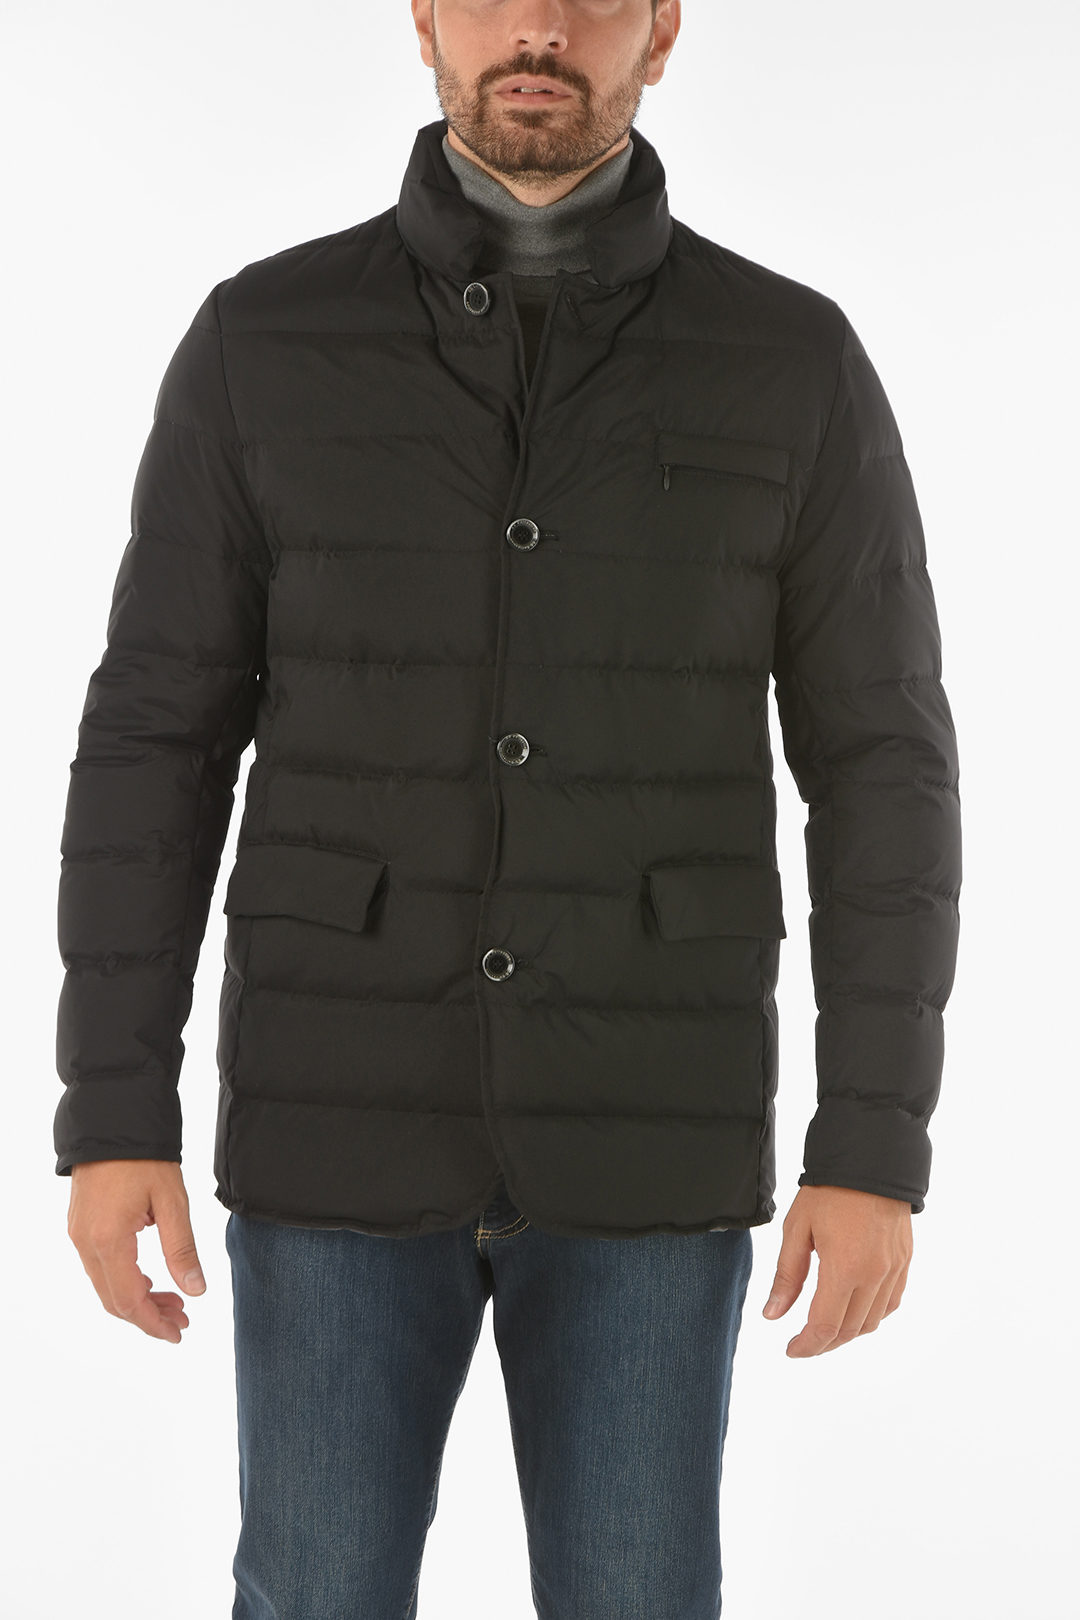 Corneliani CC COLLECTION solid color KITON down jacket with breast ...